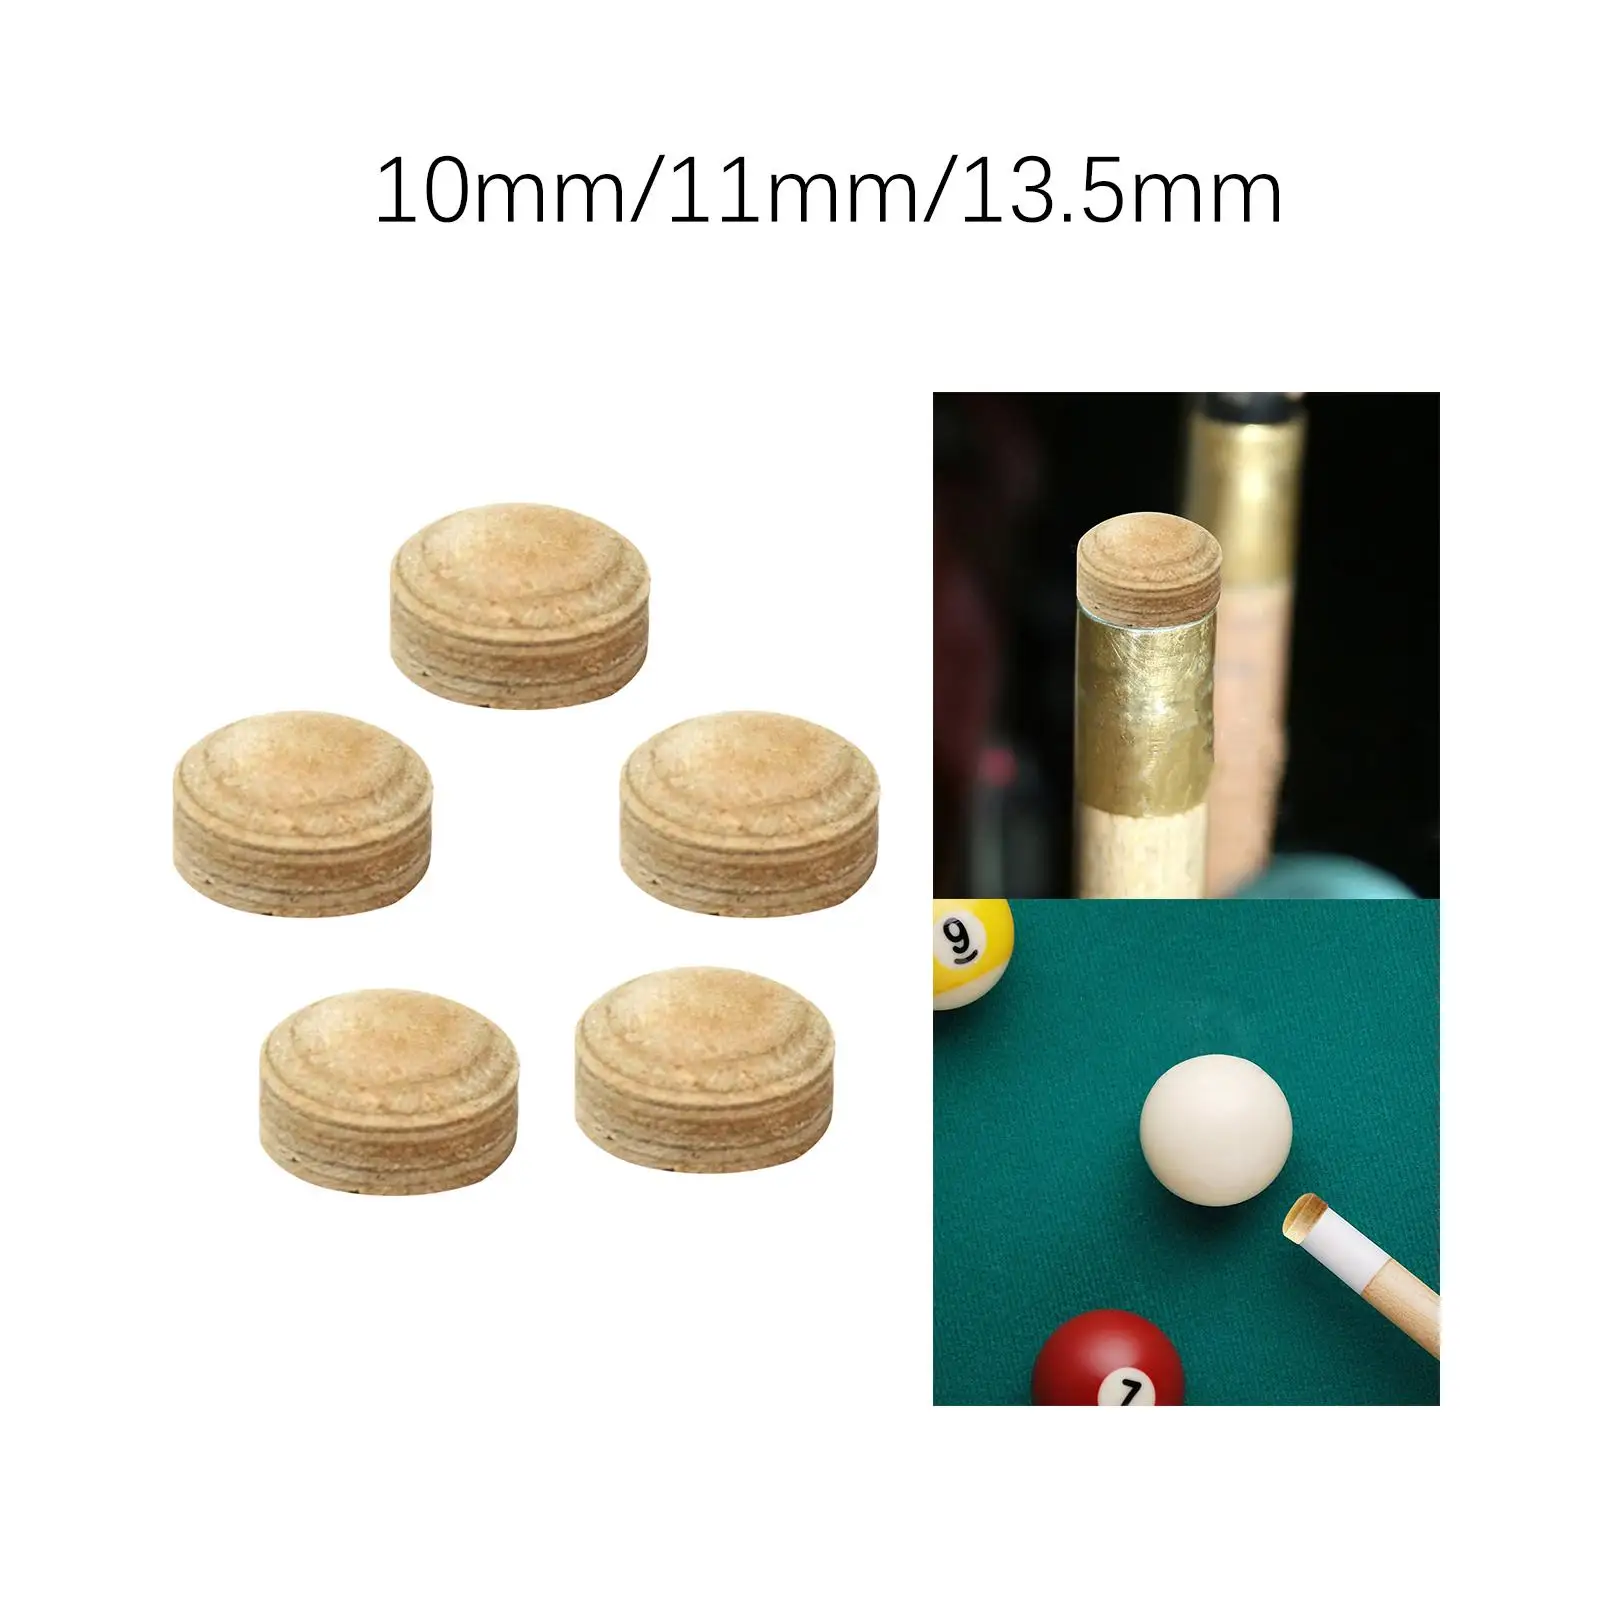 5 Pieces Table Billiards Pool Cue Tips Multi Layered Accessory Protector Repair Kit Artificial Leather for Home Personal Use